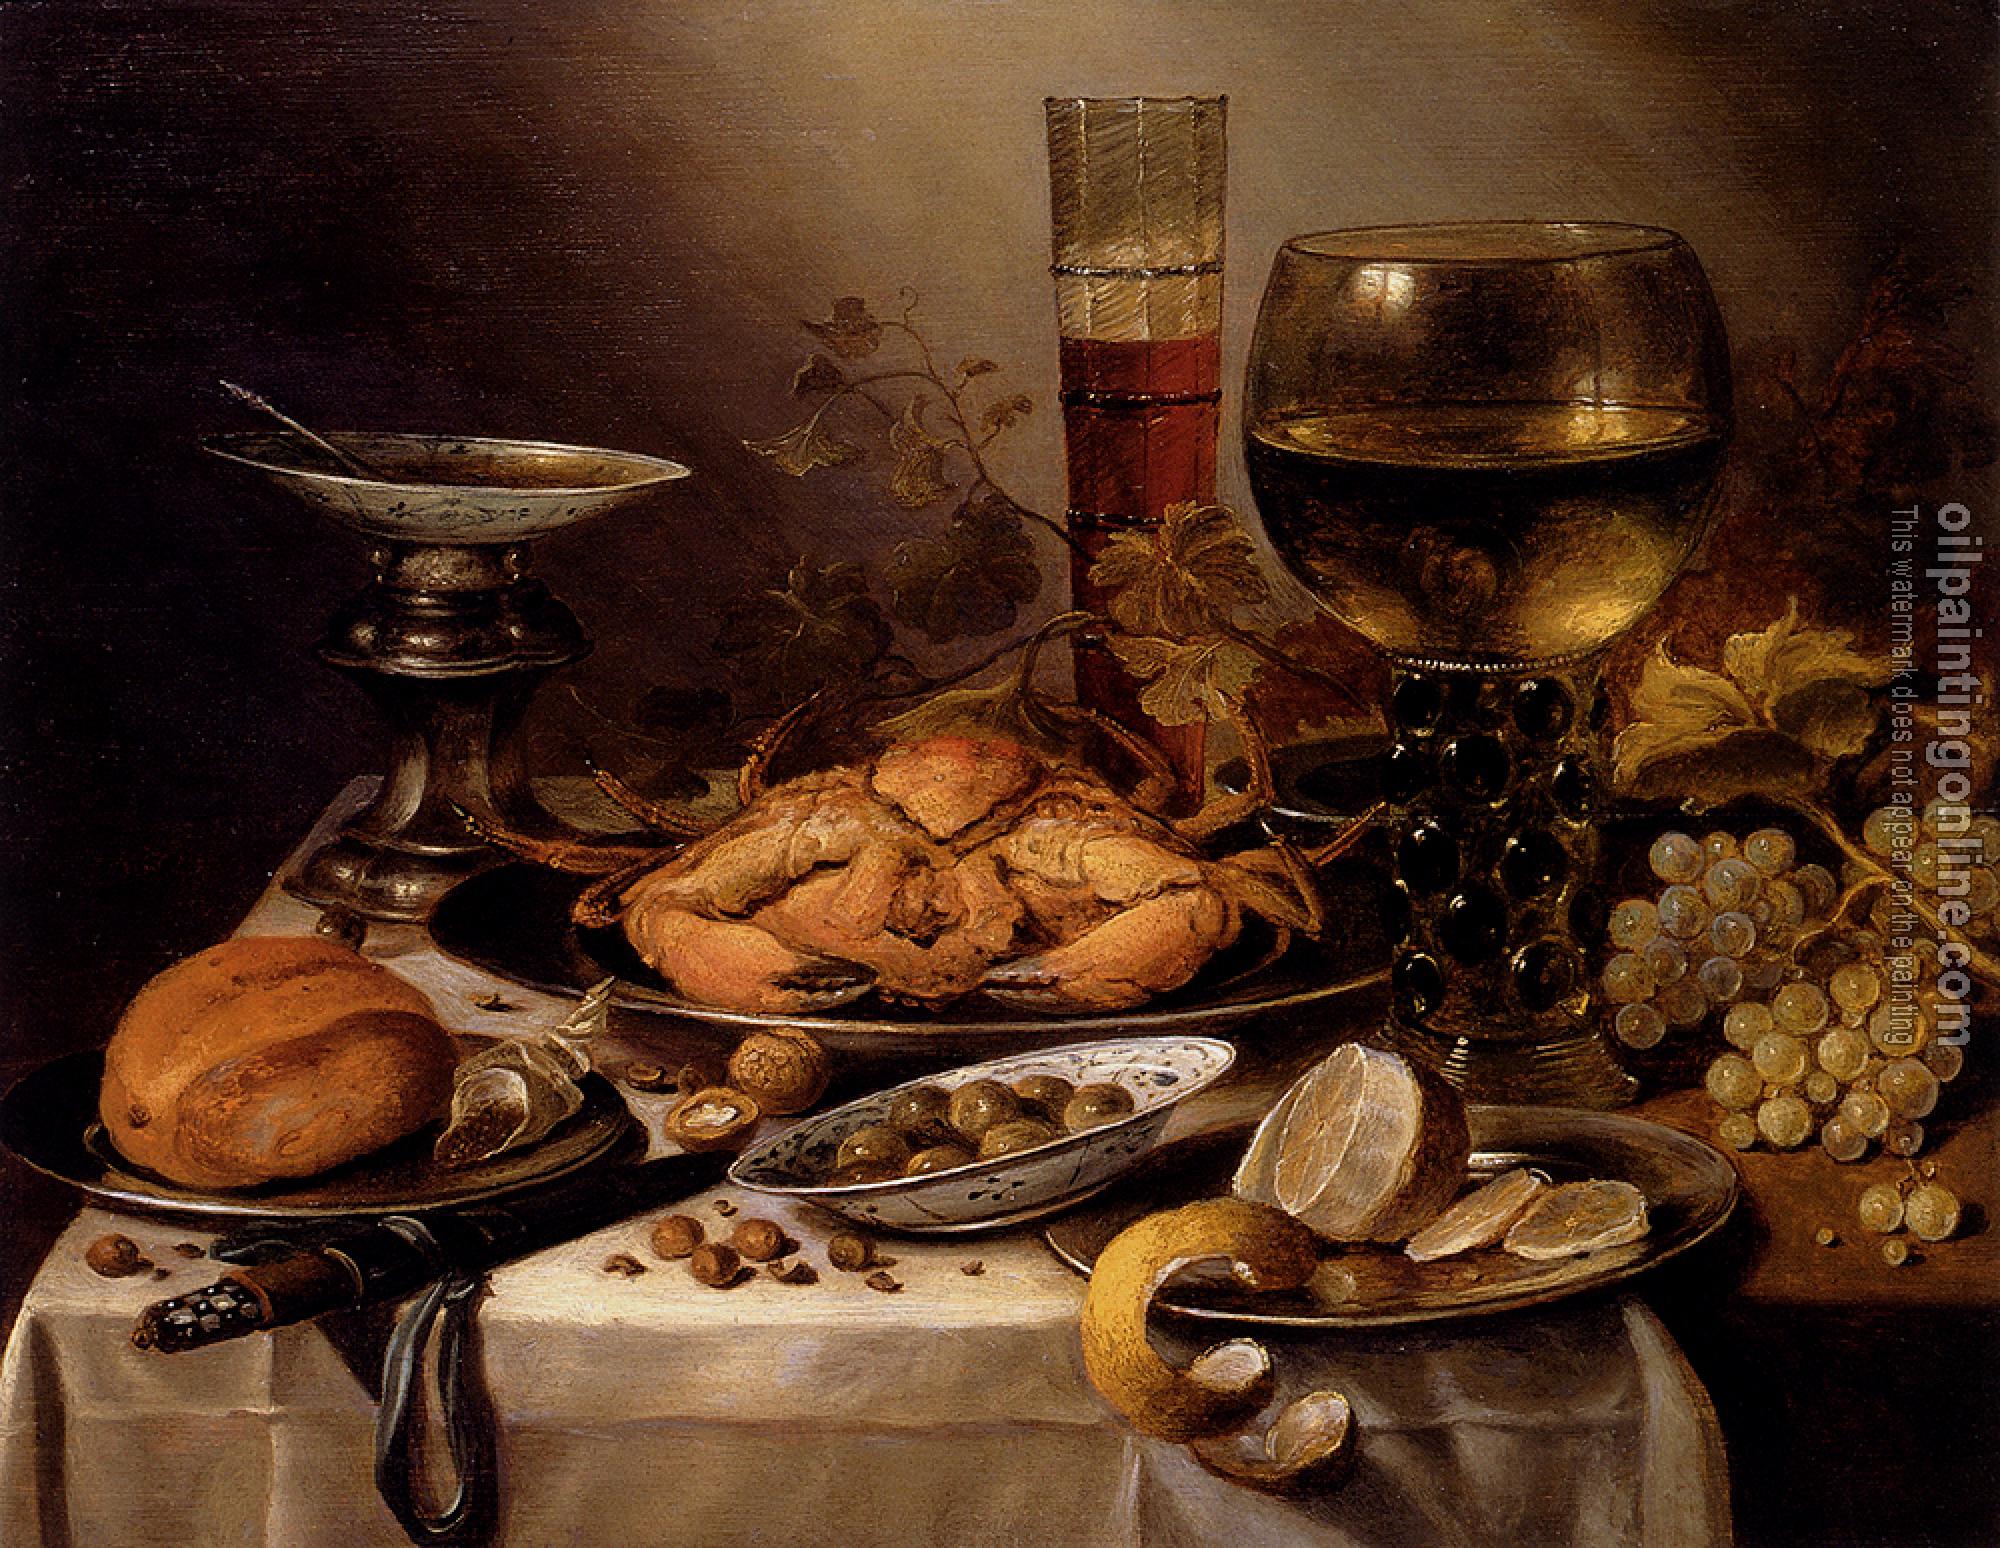 Claesz, Pieter - Banquet Still Life With A Crab On A Silver Platter, A Bunch Of Grapes, A Bowl Of Olives, And A Peeled Lemon All Resting On A Draped Table